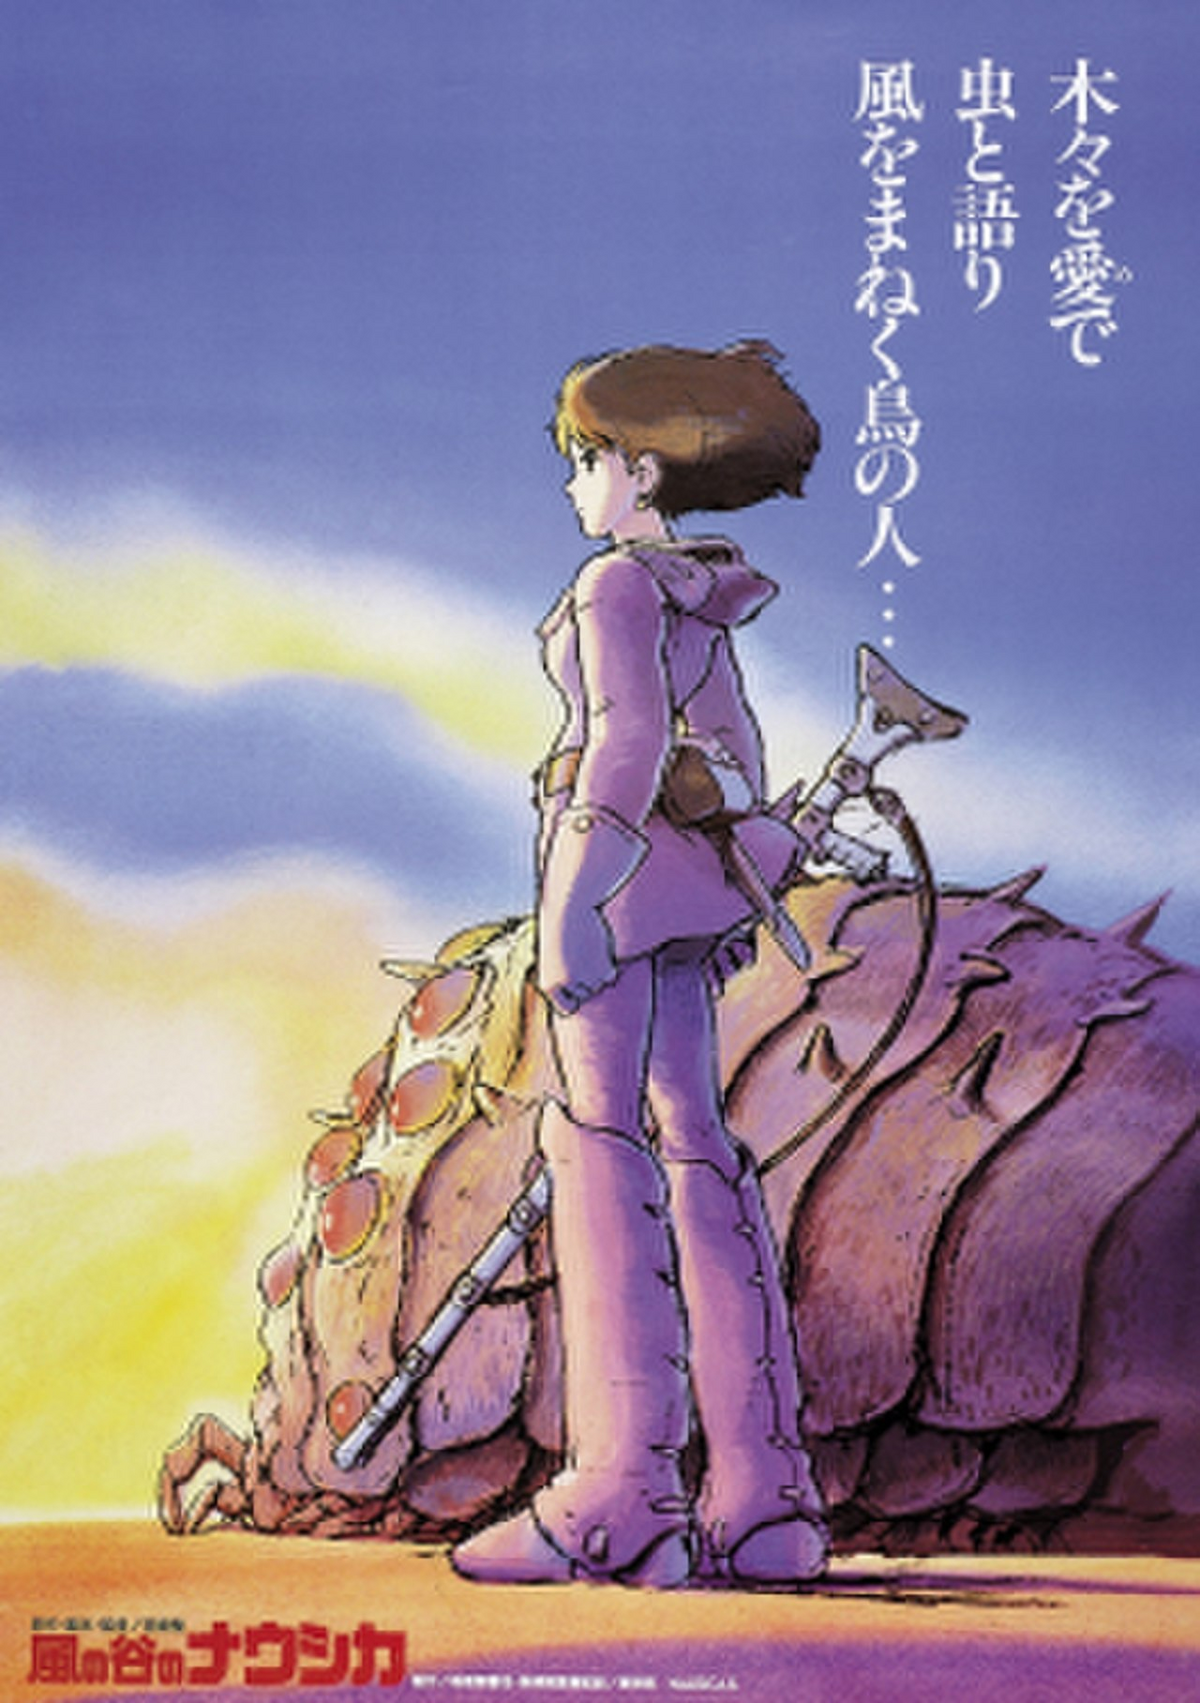 Nausicaä of the Valley of the Wind (1984) | Soundeffects Wiki 